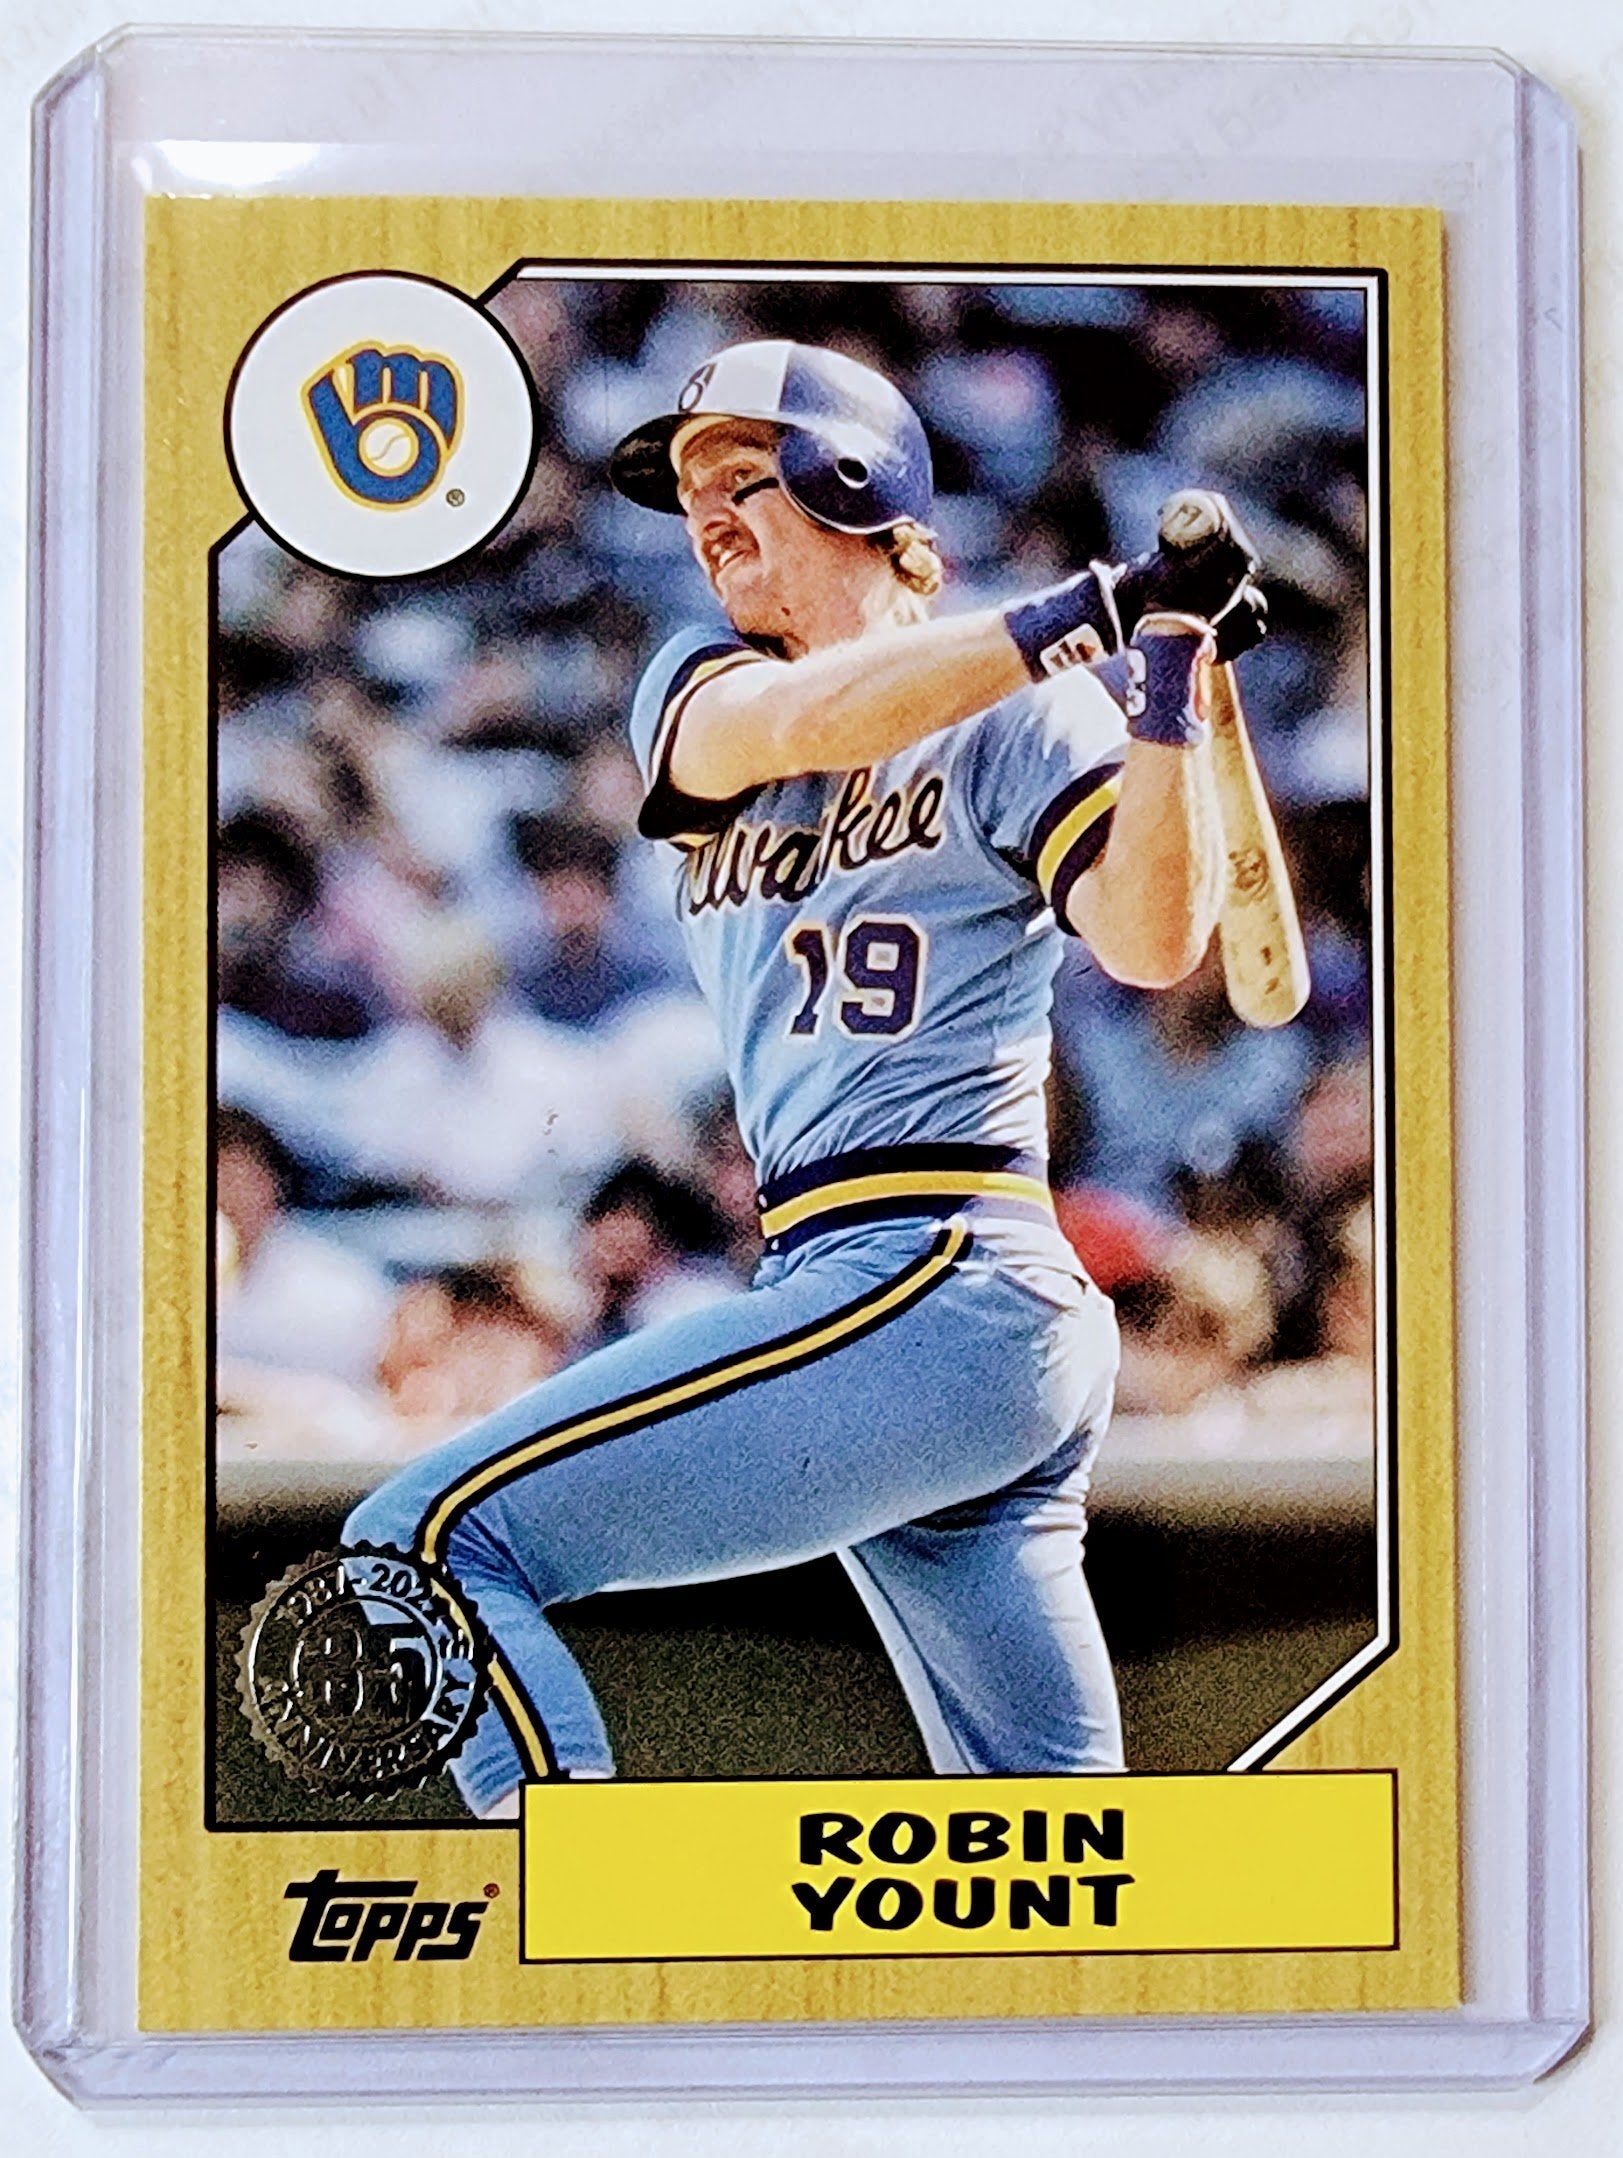 2022 Topps Series Robin Yount 35th Anniversary 1987 Baseball Trading Card GRB1 simple Xclusive Collectibles   